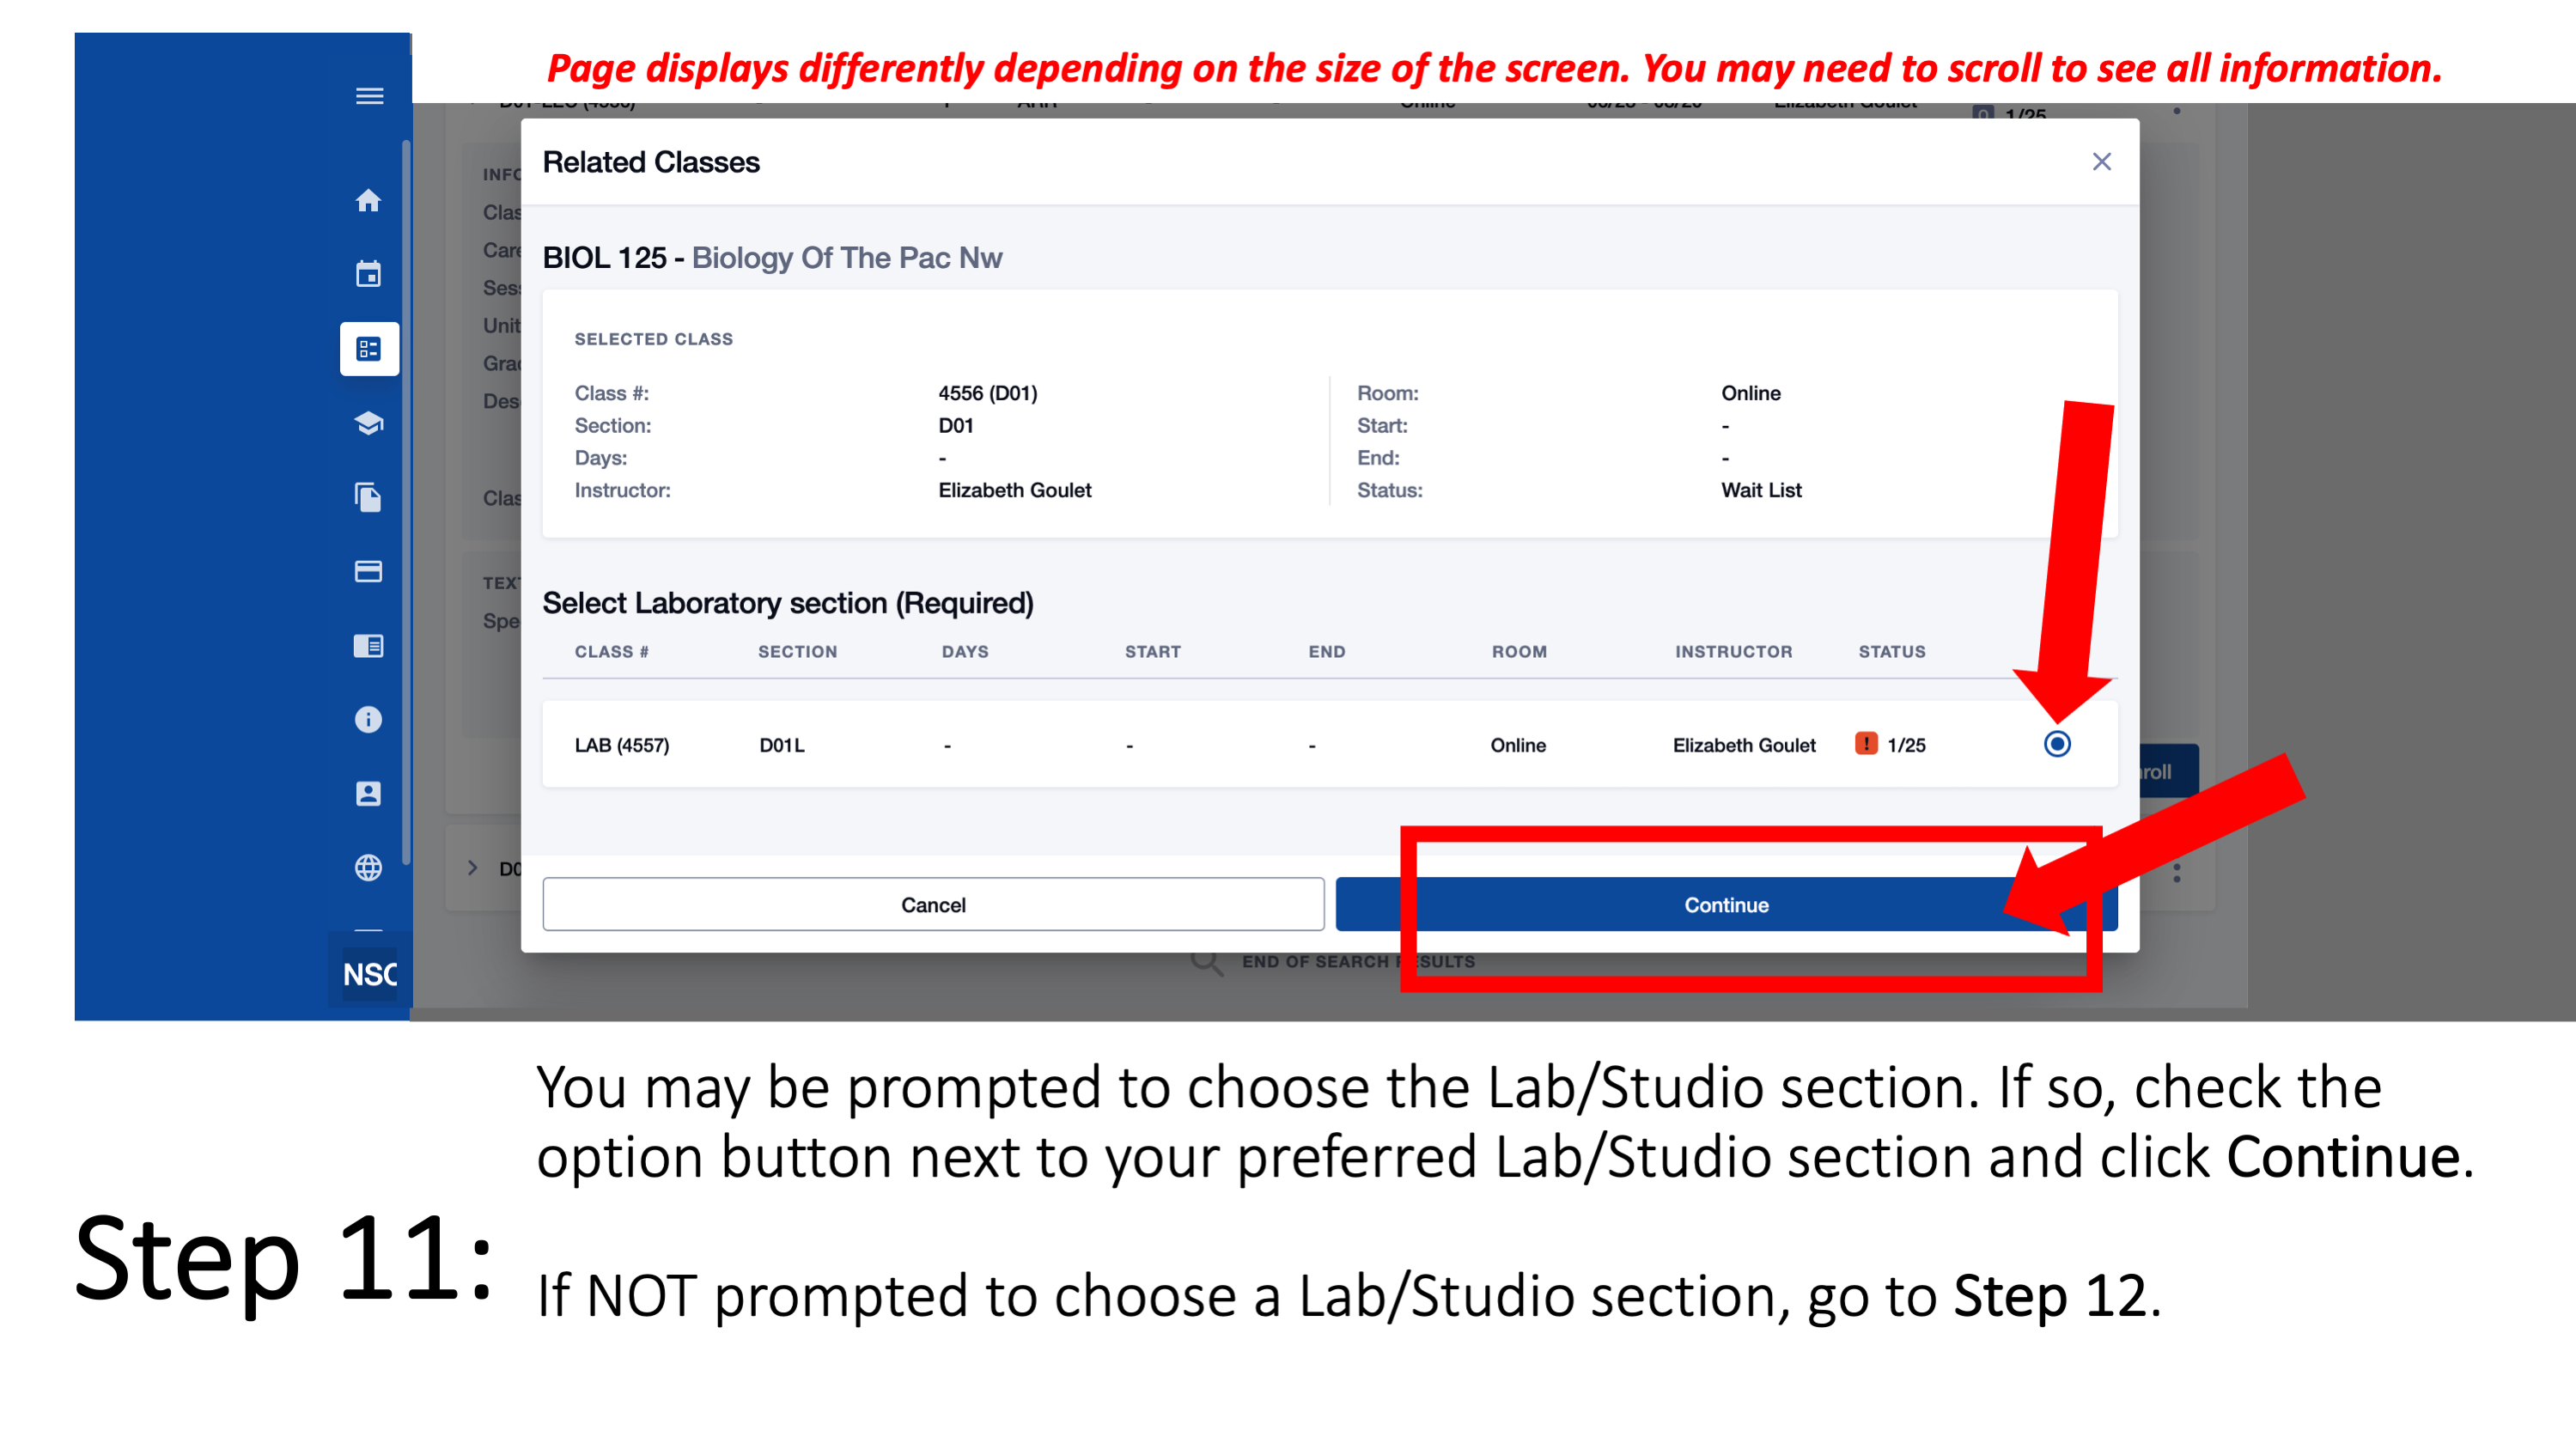 Step 11: You may be prompted to choose the Lab/Studio section. If so, check the option button next to your preferred Lab/Studio section and click Continue. If NOT prompted to choose a Lab/Studio section, go to Step 12.